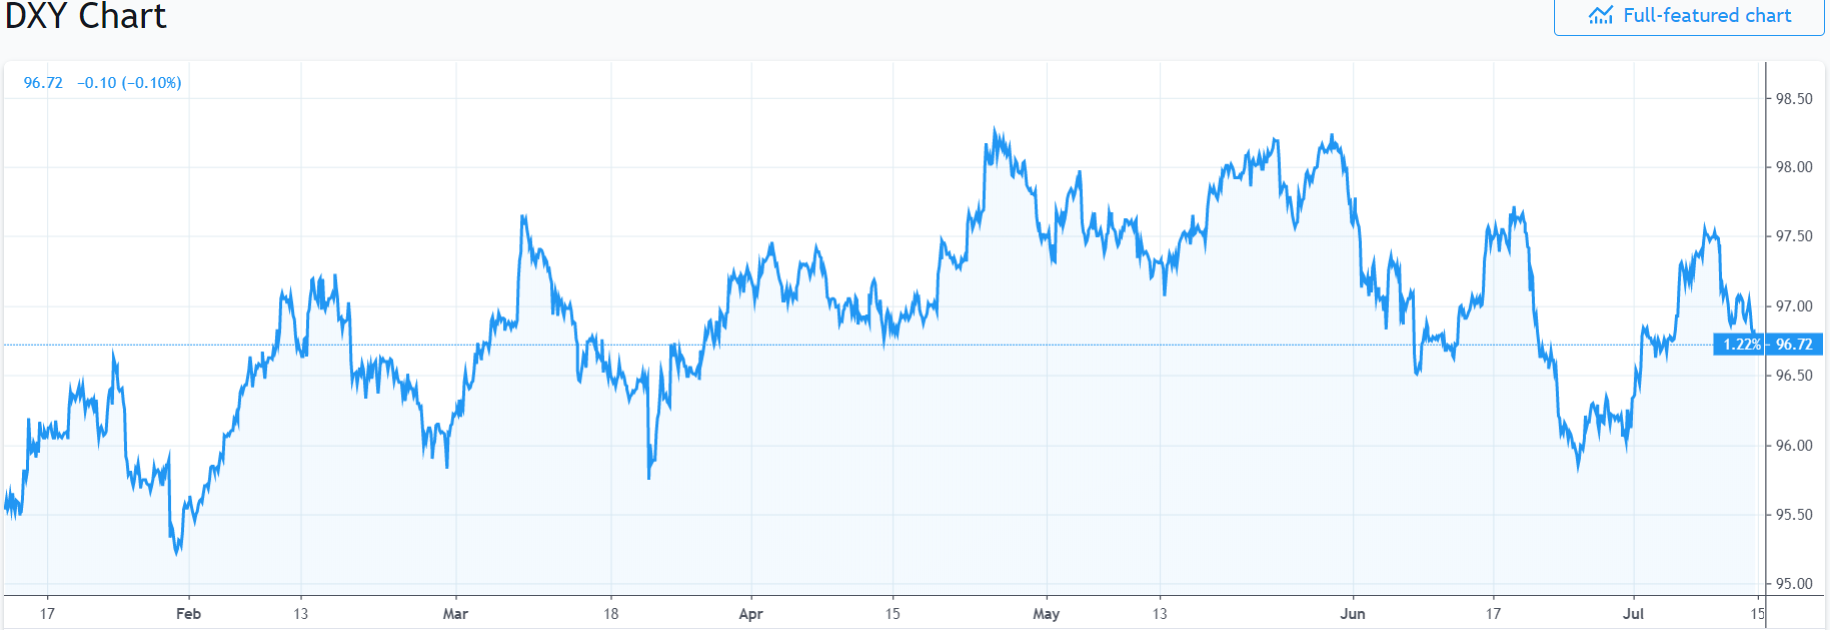 Trading View - USD DXY Chart - 15 July 2019